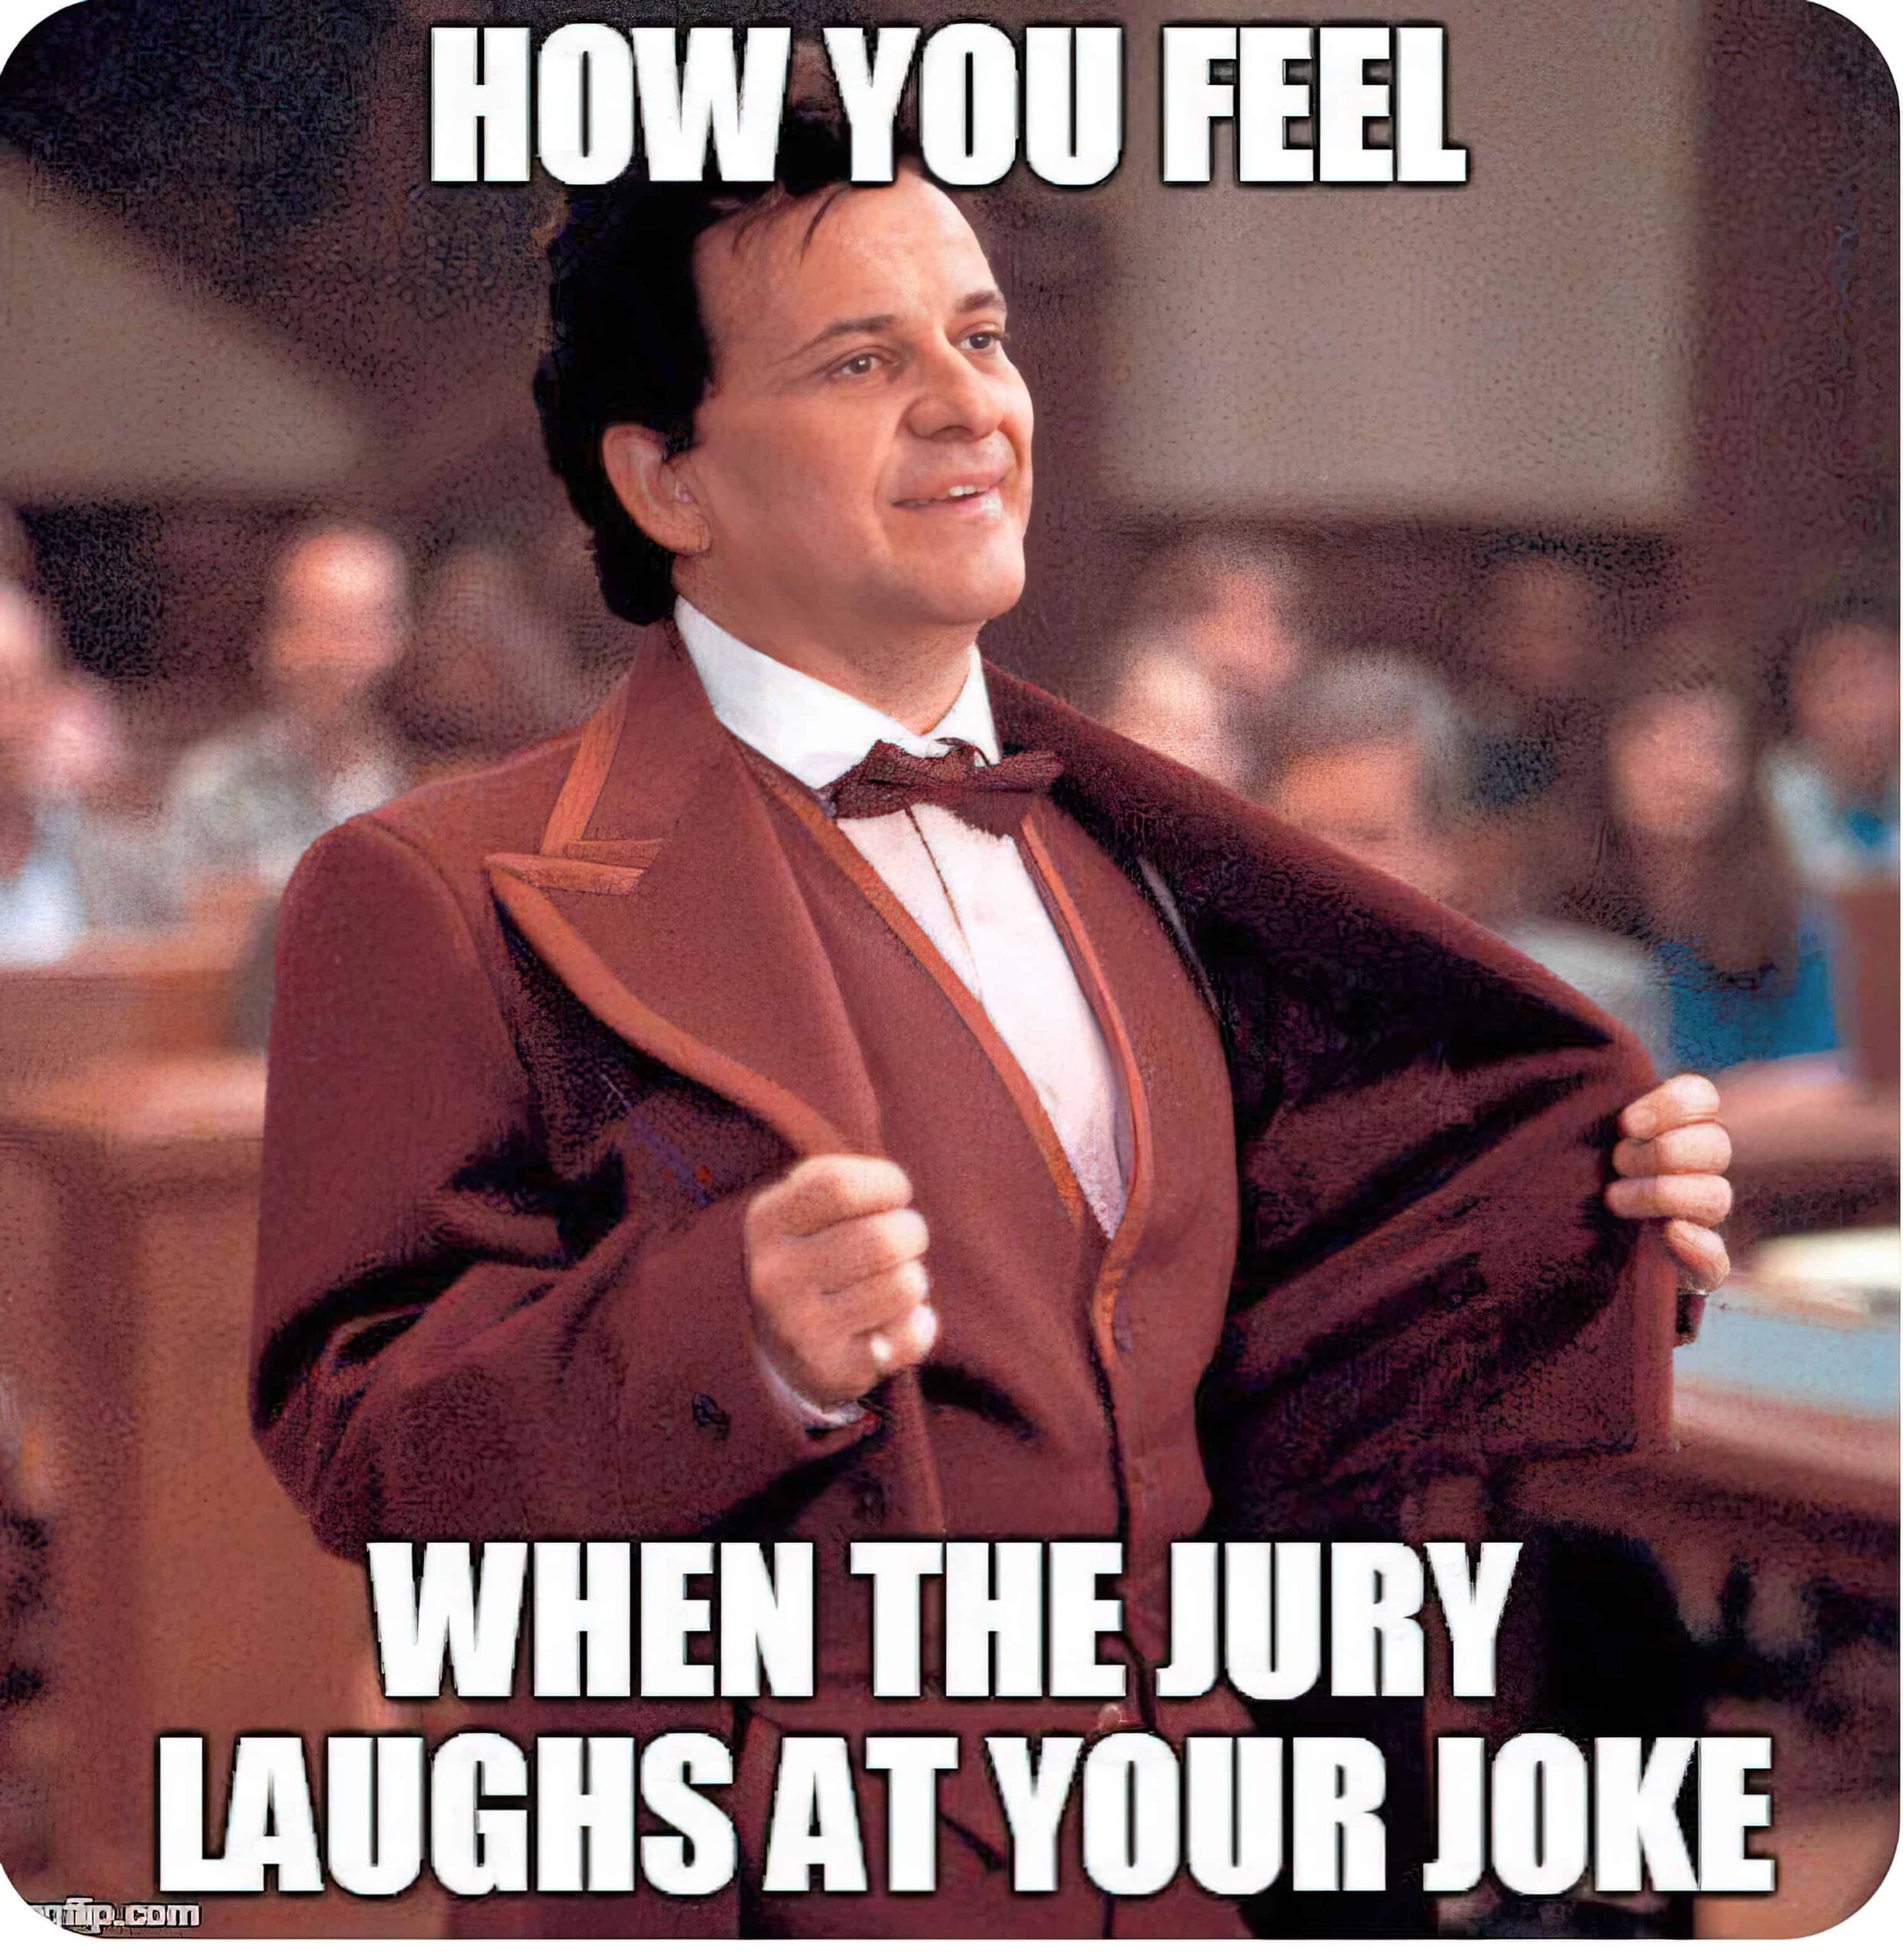 Laugh it Up: 18 of the Funniest Lawyer Memes on the Internet